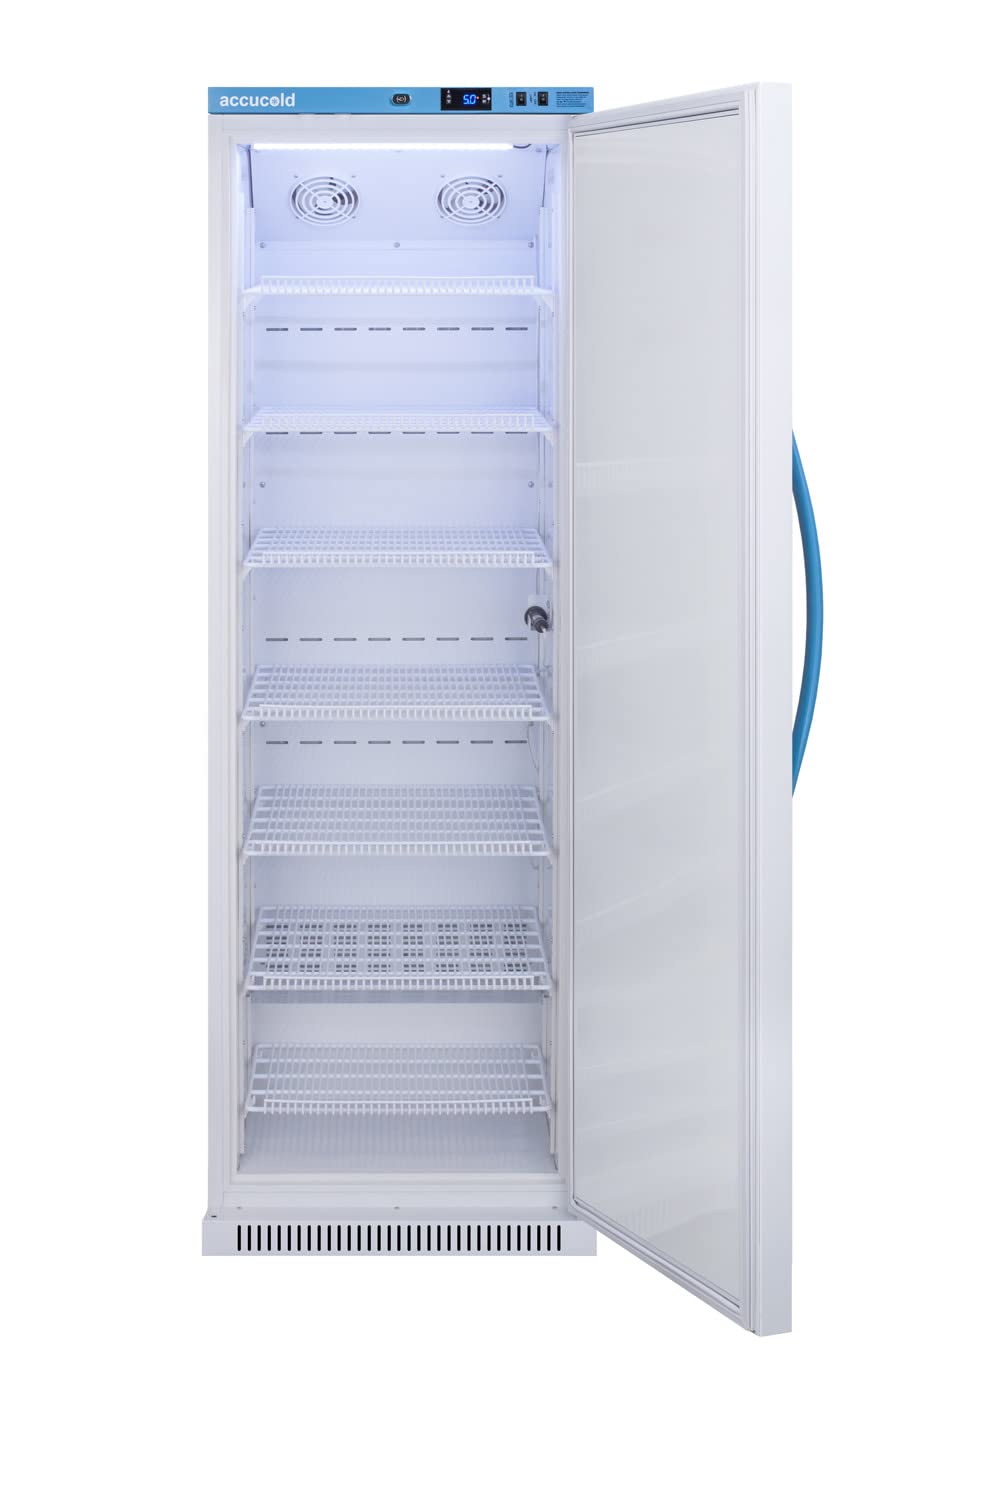 Summit Appliance ARS15PV Pharma-Vac Performance Series 15 Cu.Ft. Uprigth All-refrigerator for Vaccine Storage with Automatic Defrost, Factory-installed Lock, Digital Thermostat, White